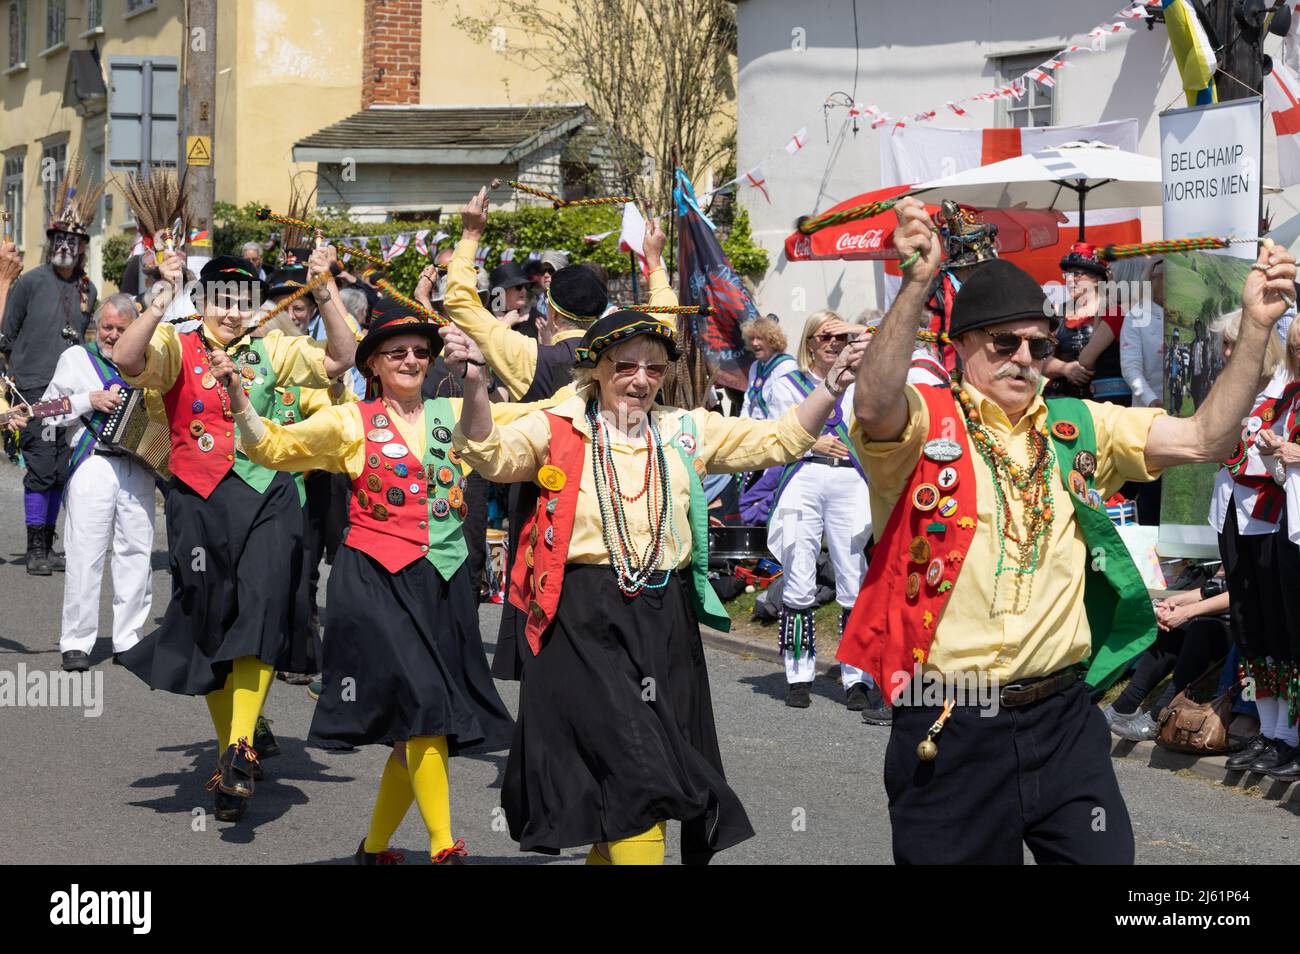 Morris dancers UK; traditional Morris dancing on St Georges Day in the street, Hundon Village, Suffolk UK Stock Photo